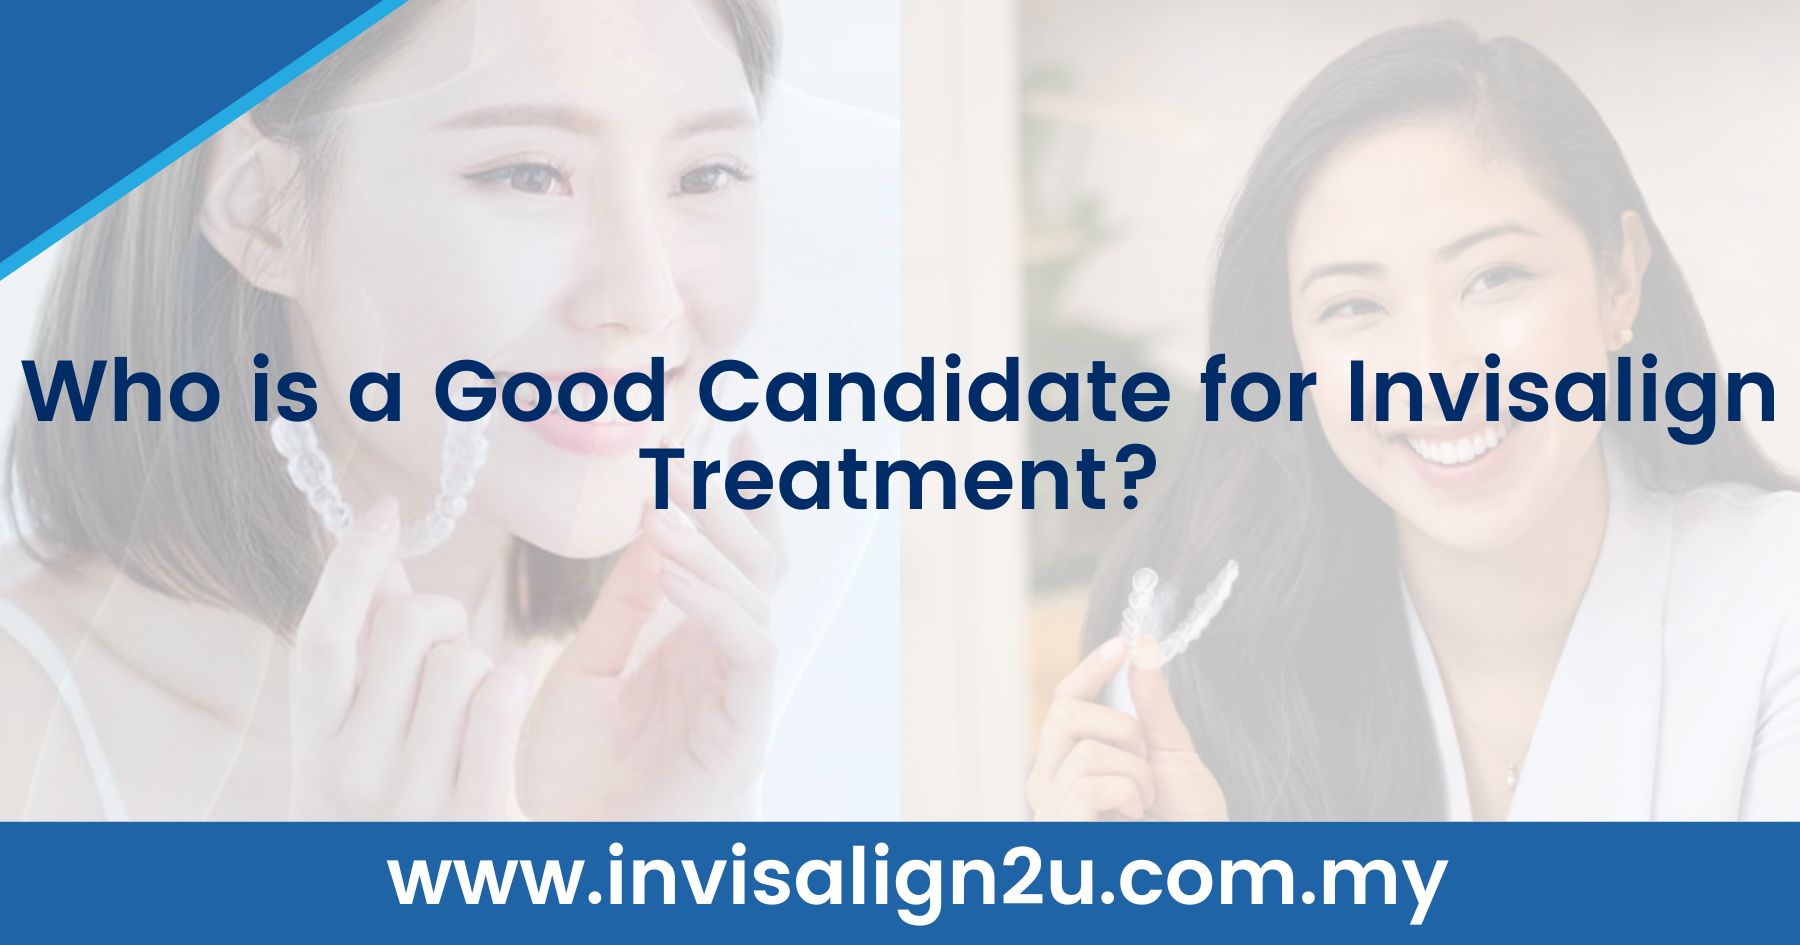 Who is a Good Candidate for Invisalign Treatment?